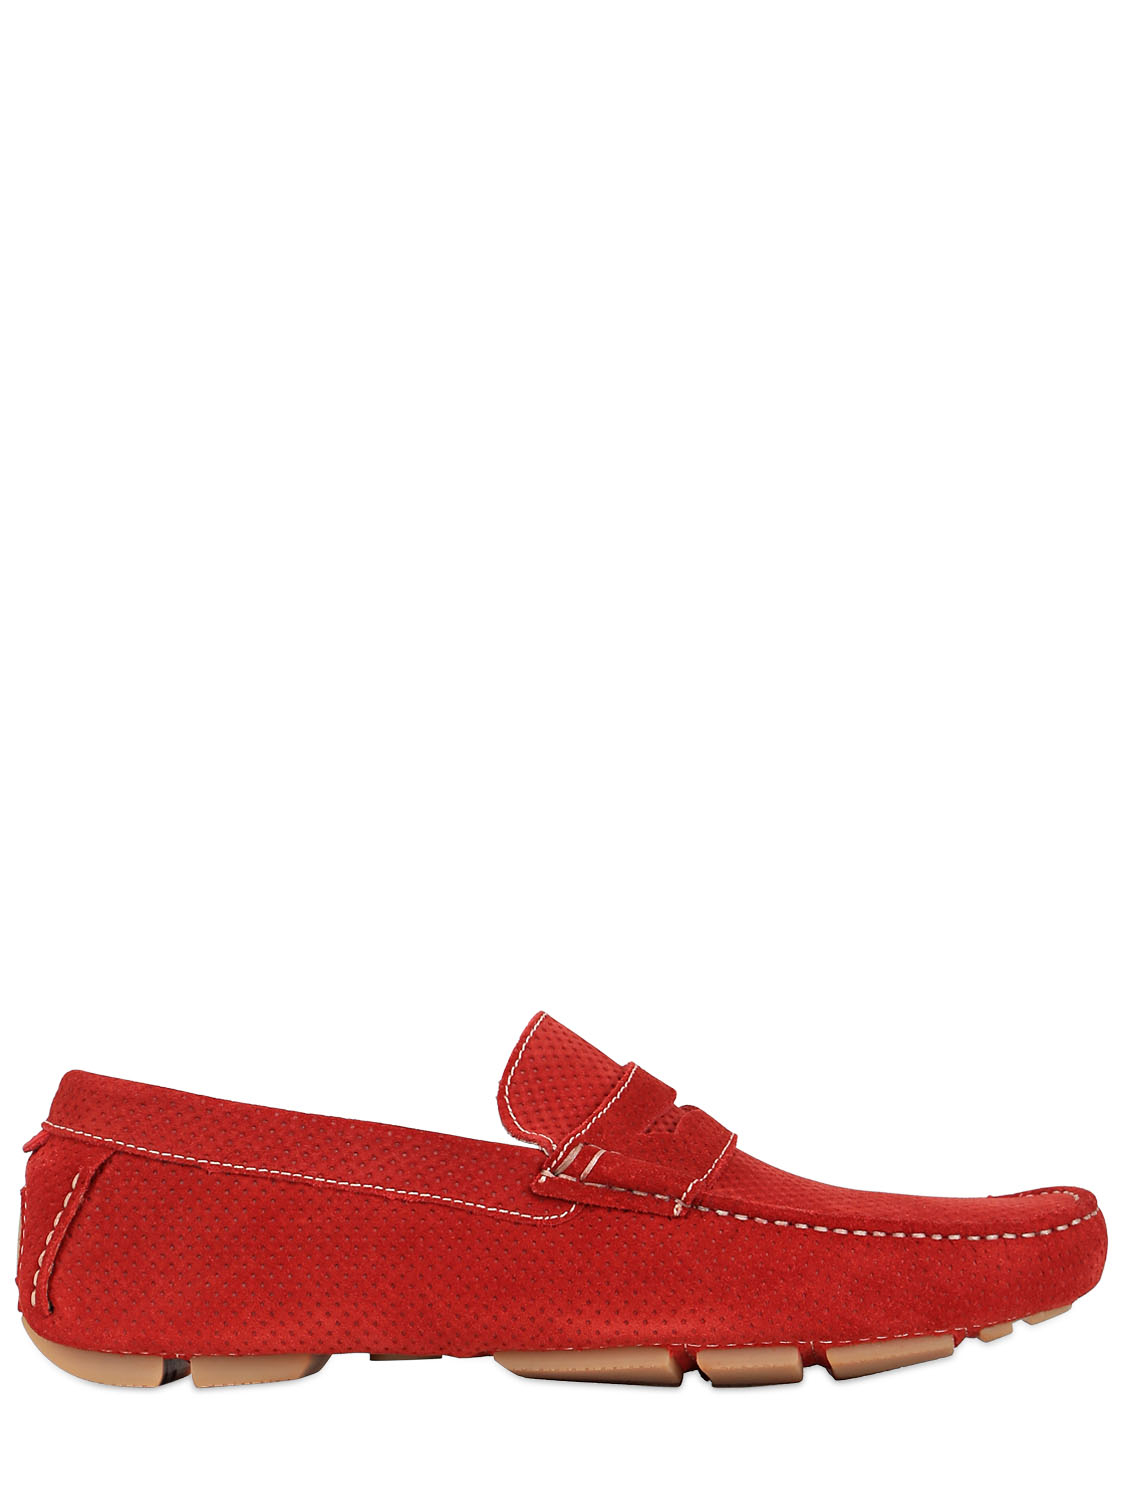 A.testoni Perforated Suede Driving Shoes in Red for Men | Lyst